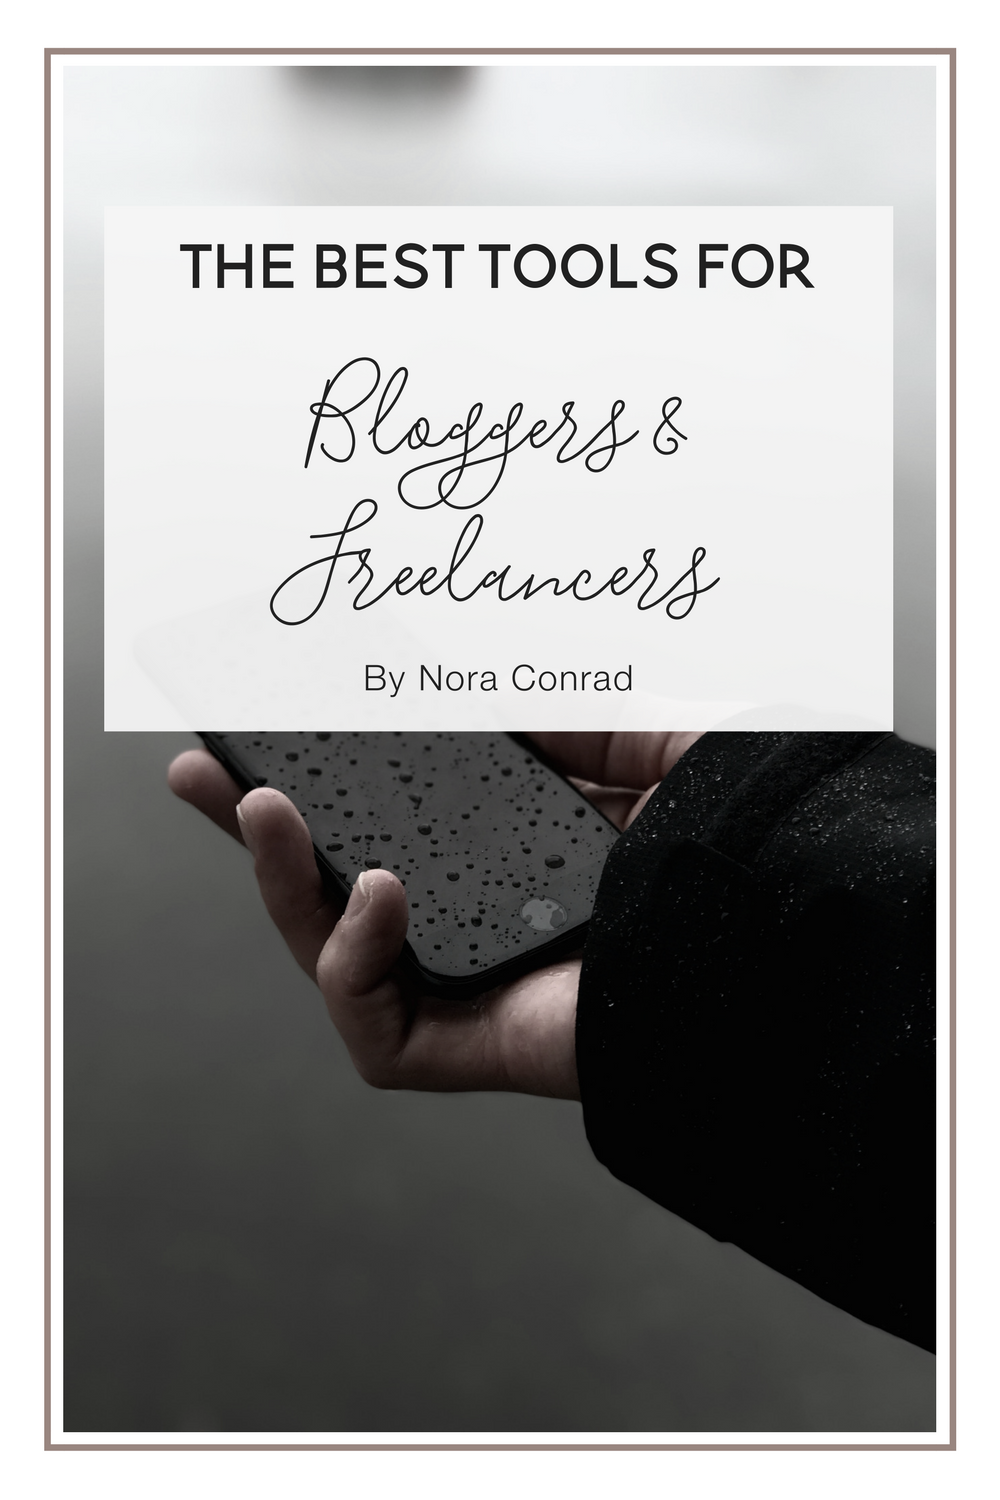 There are some incredibly powerful tools on the web for business owners and bloggers. This is a list of some of my favorites, along with some info to get you started.